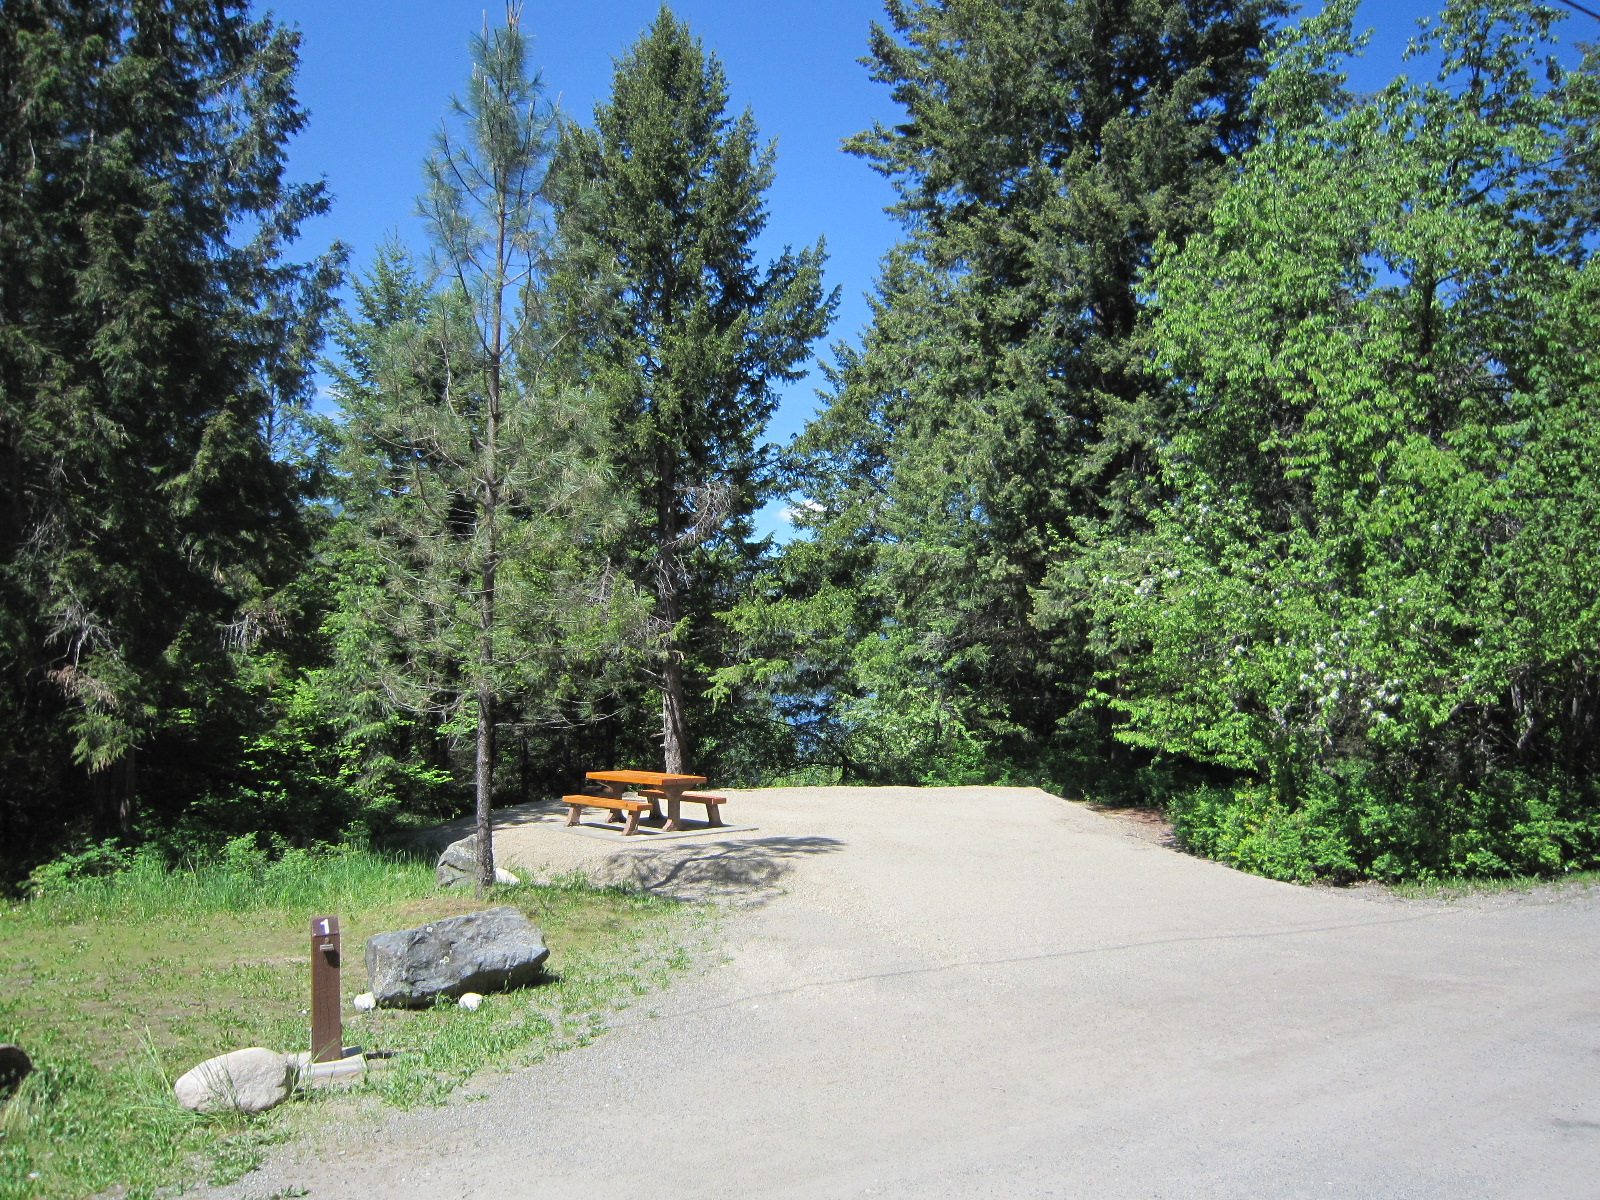 BC Provincial Park campground